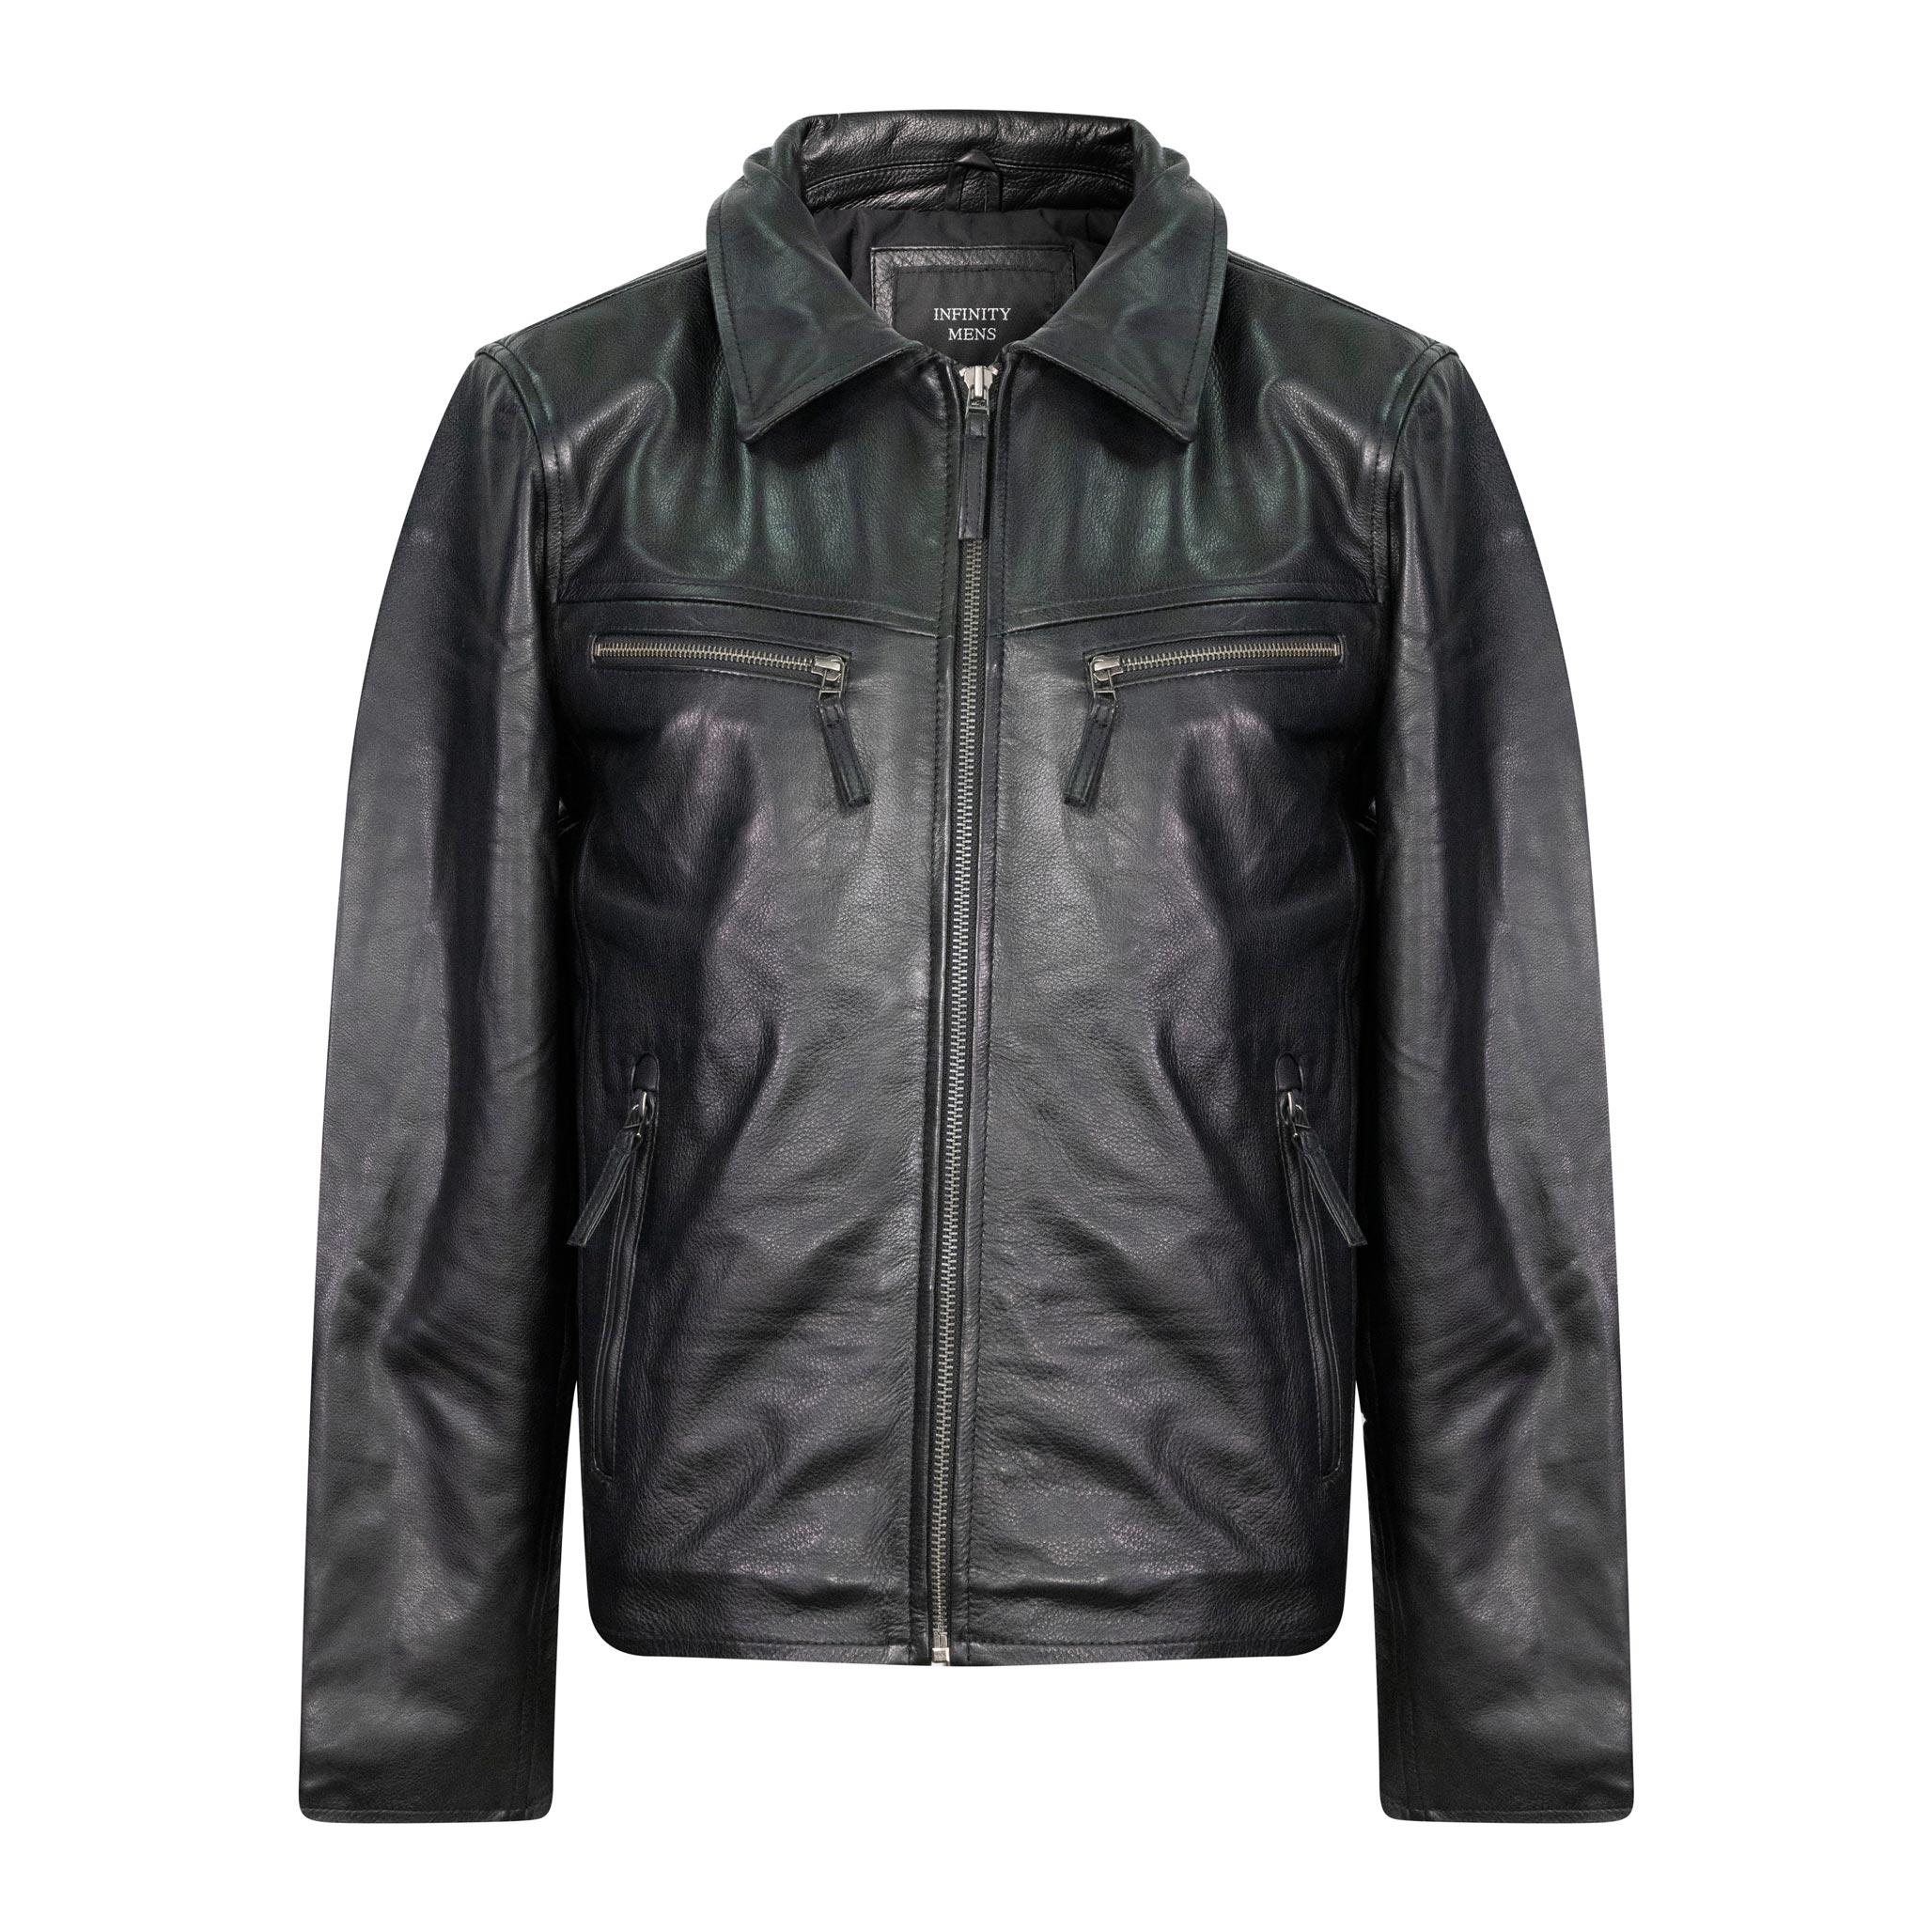 A classic looking black leather jacket, with zipped side pockets, and chest pockets.